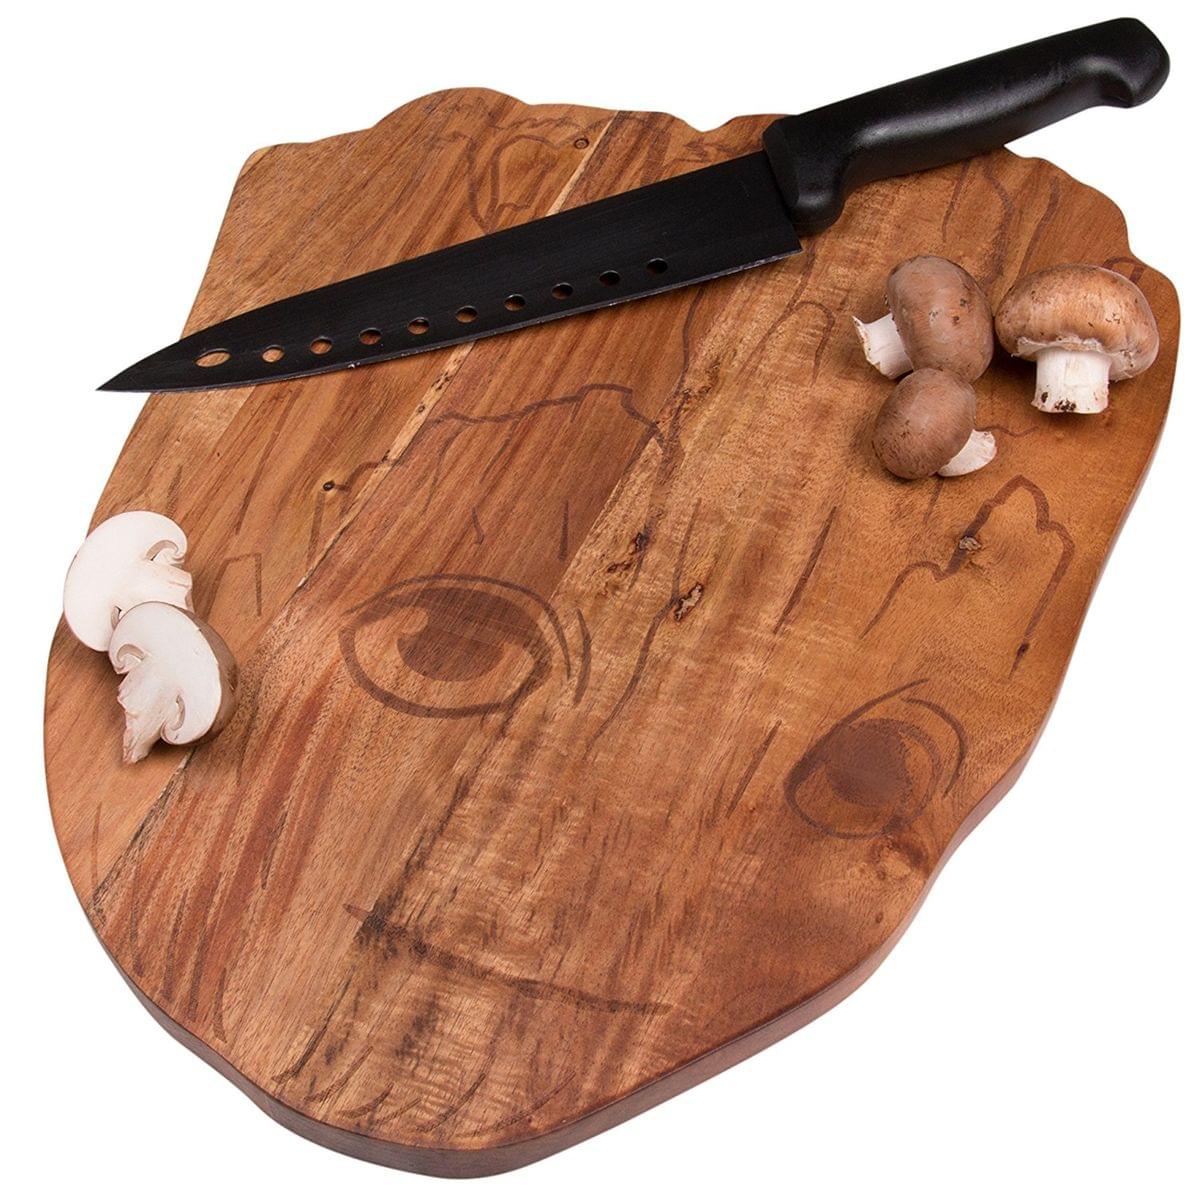 Guardians of the Galaxy Baby Groot 15" Wood Cutting Board